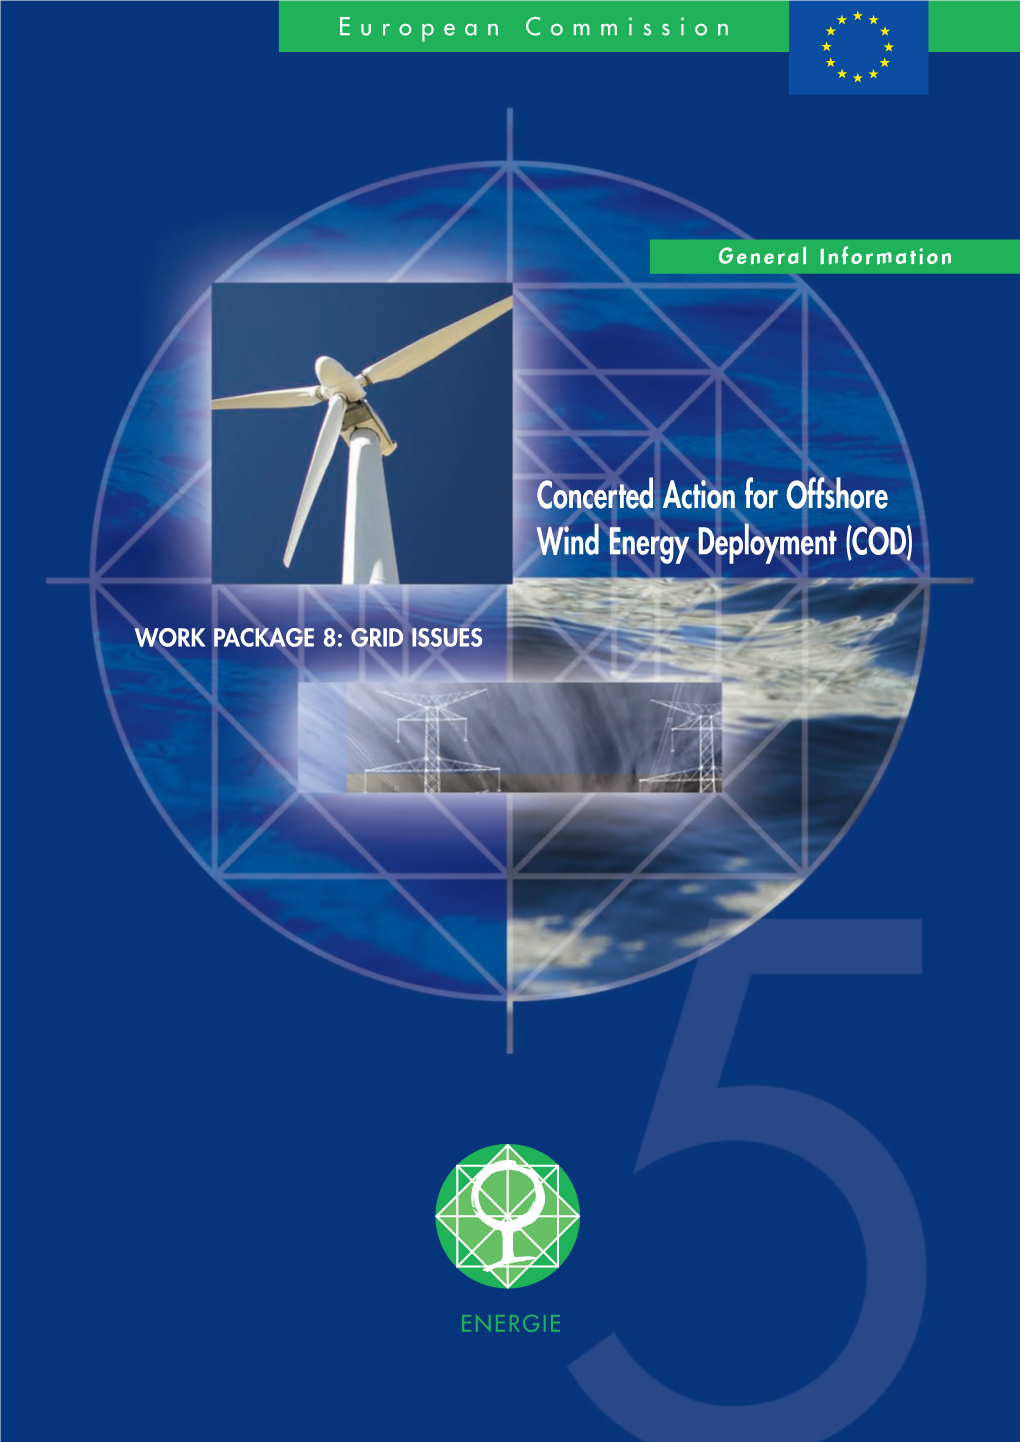 Concerted Action for Offshore Wind Energy Deployment (COD)